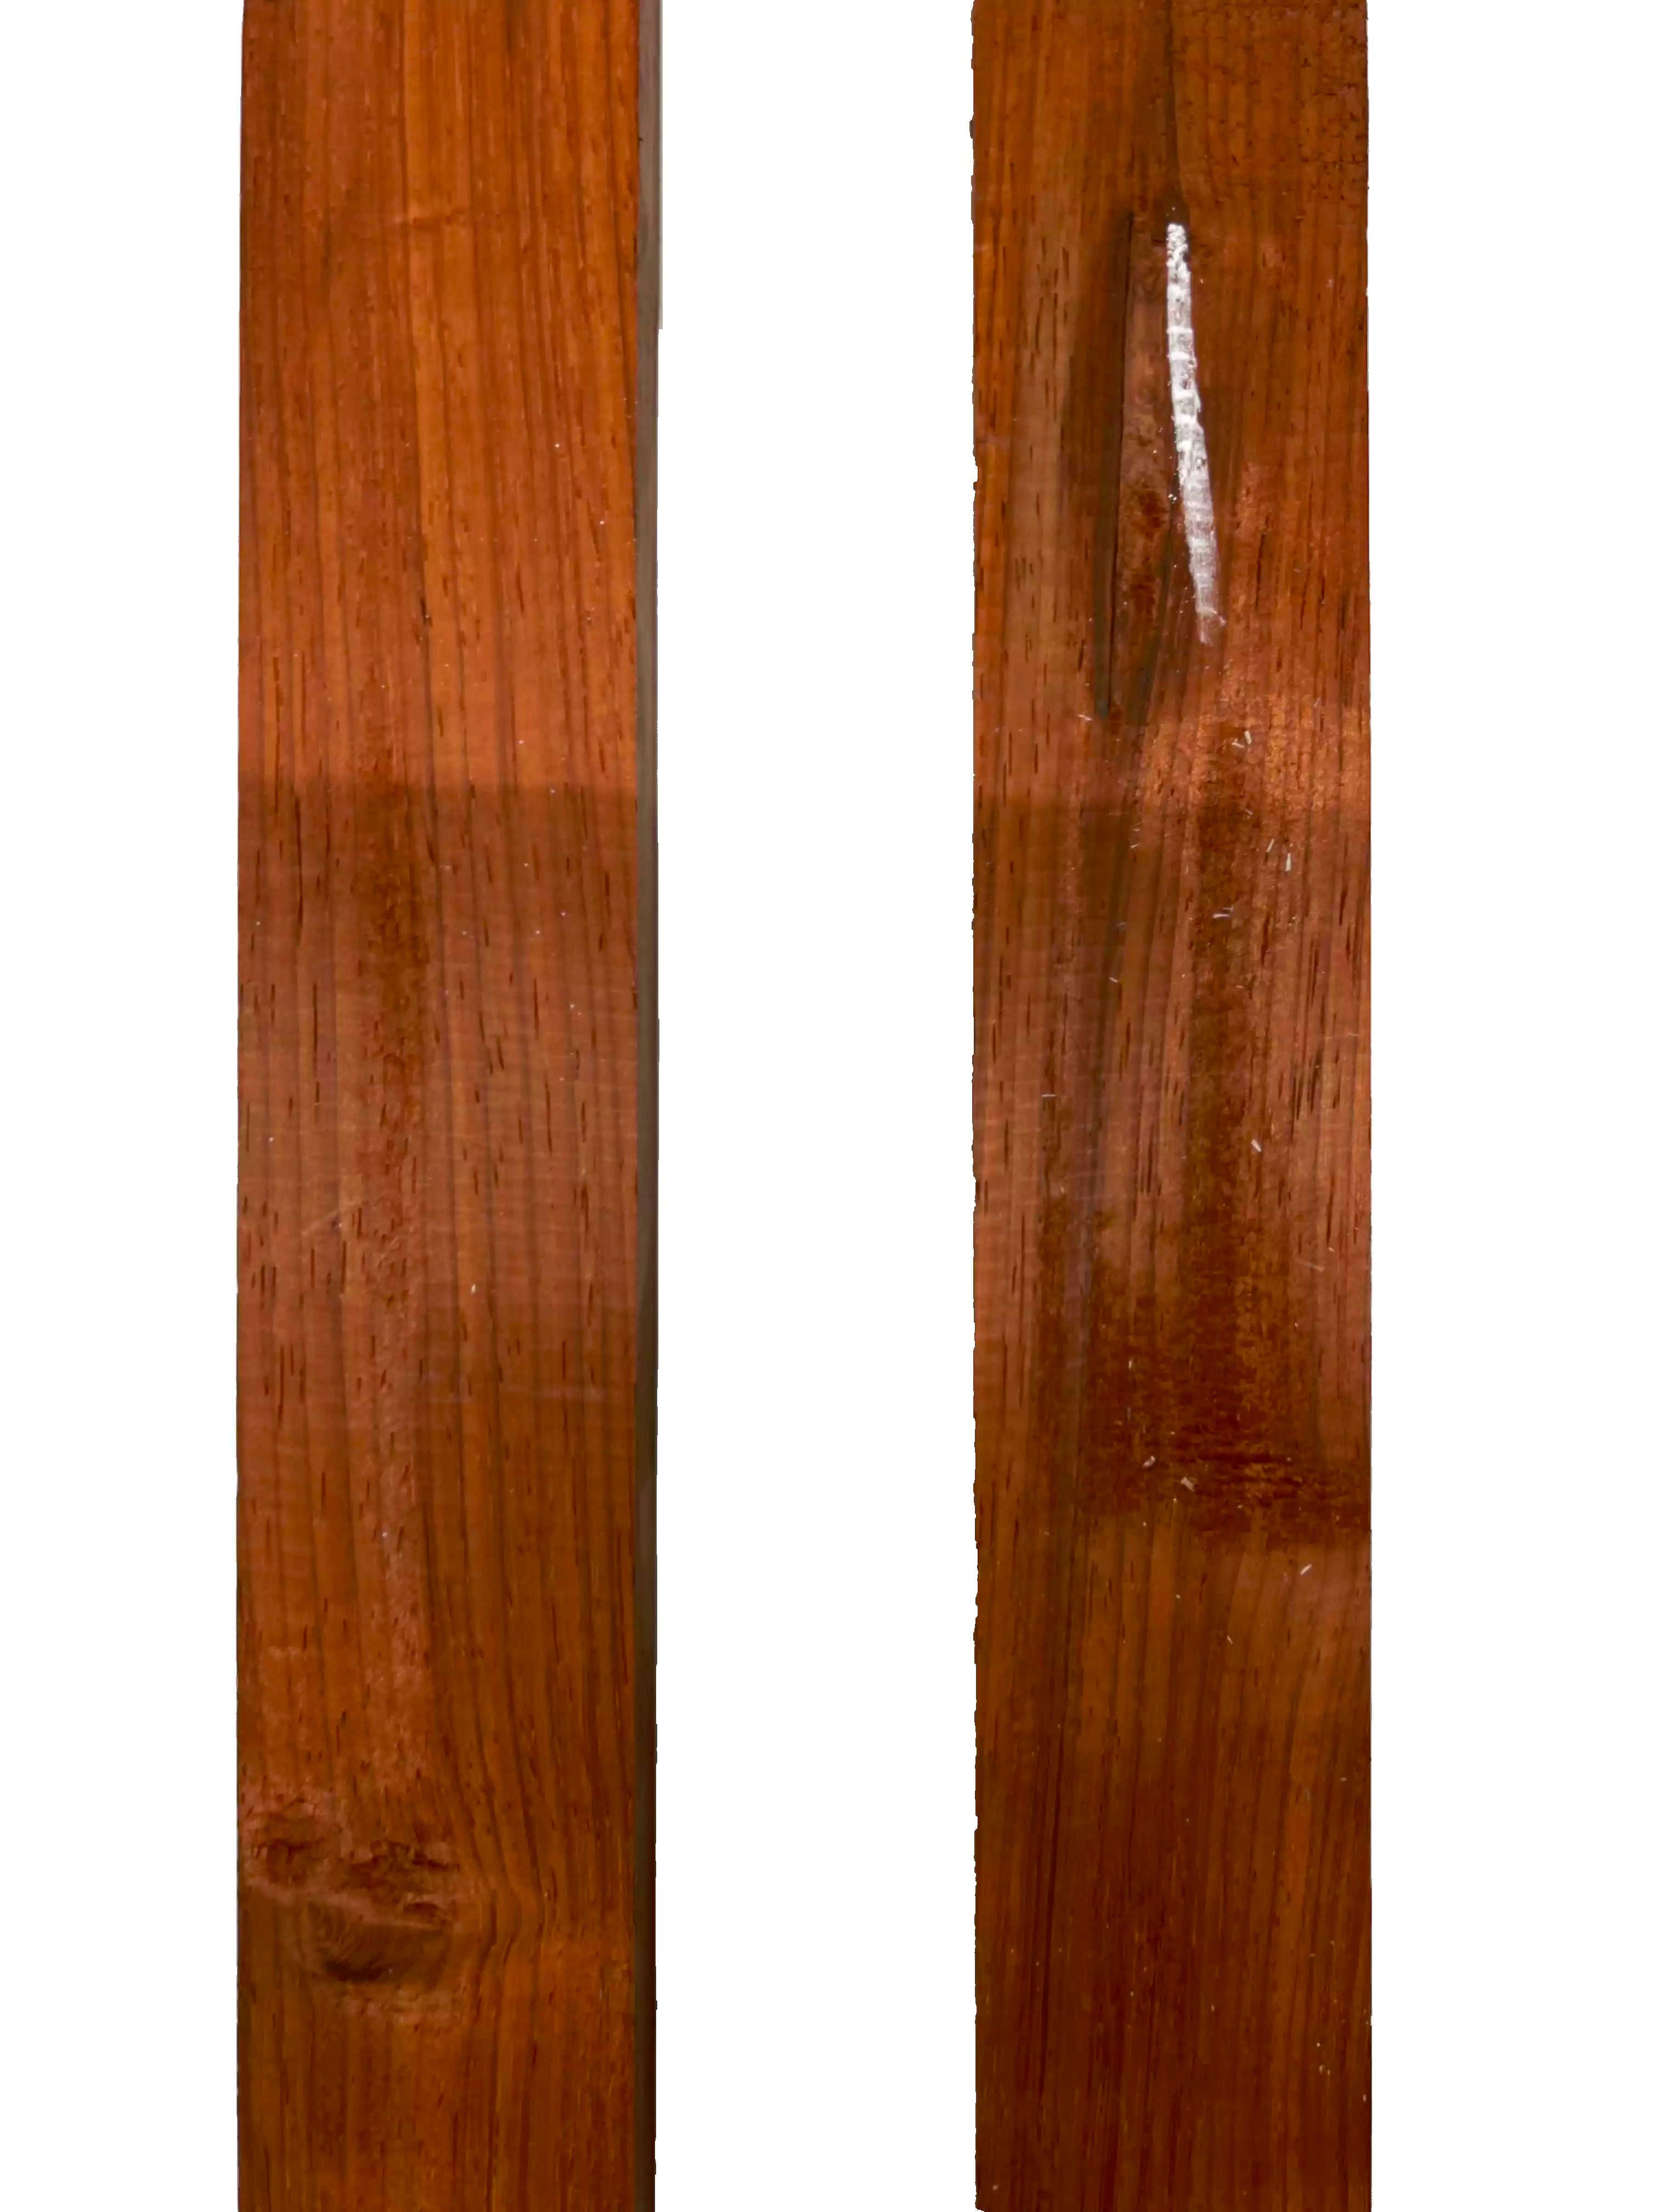 Pack of 2, African Padauk Thin Stock Three Dimensional Lumber Board Wood Blank 18&quot; x 2&quot; x 1&quot; 